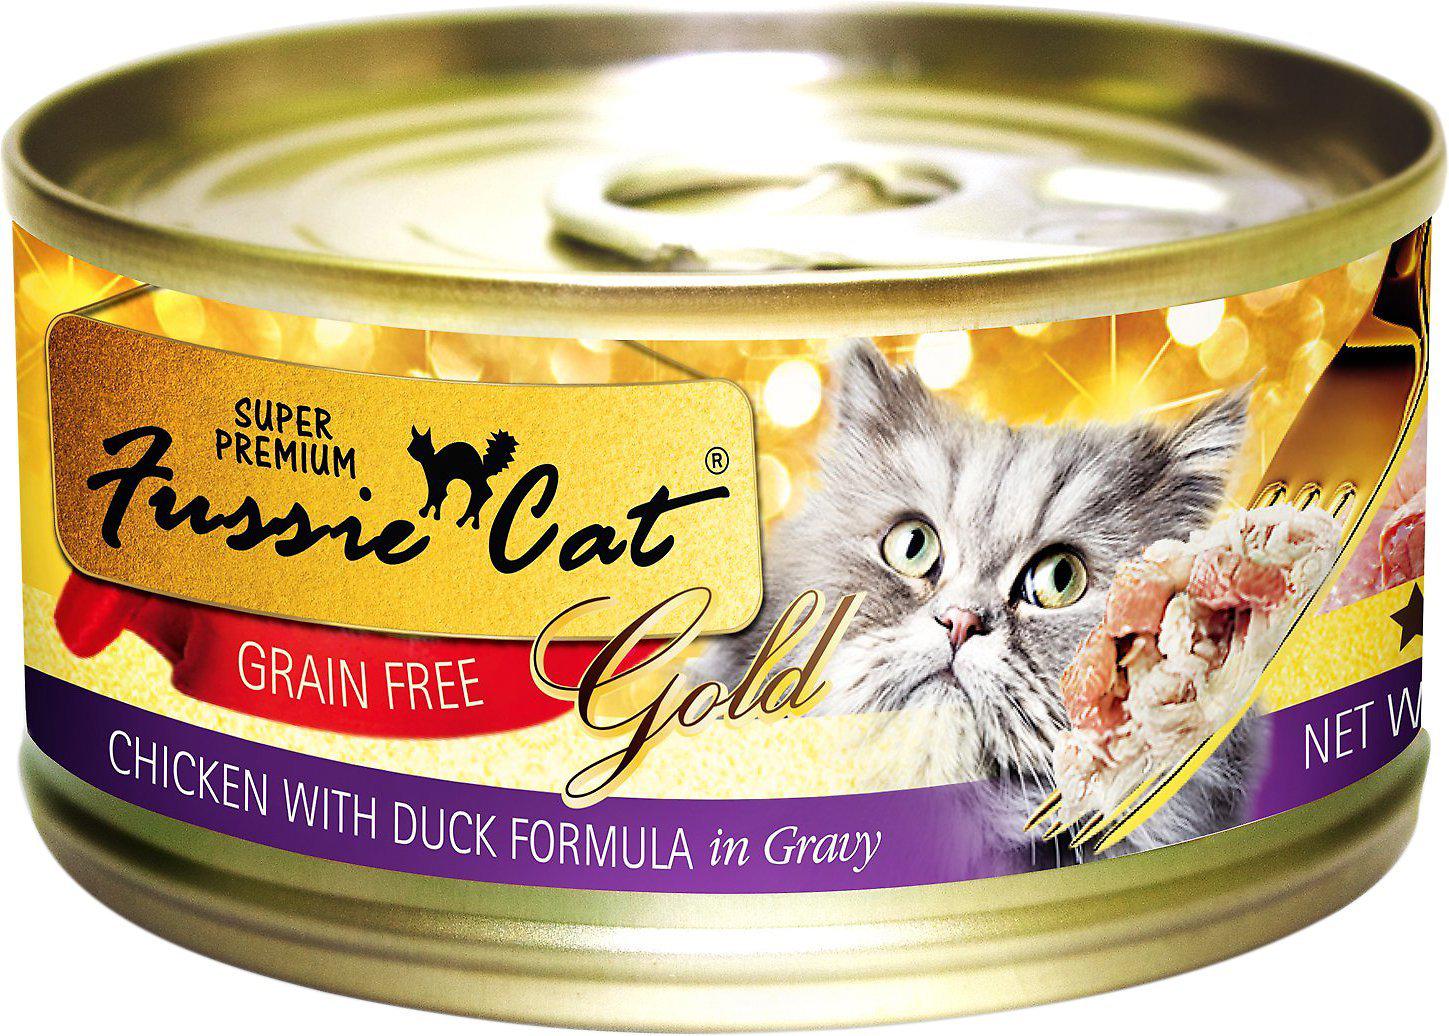 Fussie Cat Super Premium Chicken with Duck Formula in Gravy Grain-Free Wet Cat Food-Le Pup Pet Supplies and Grooming